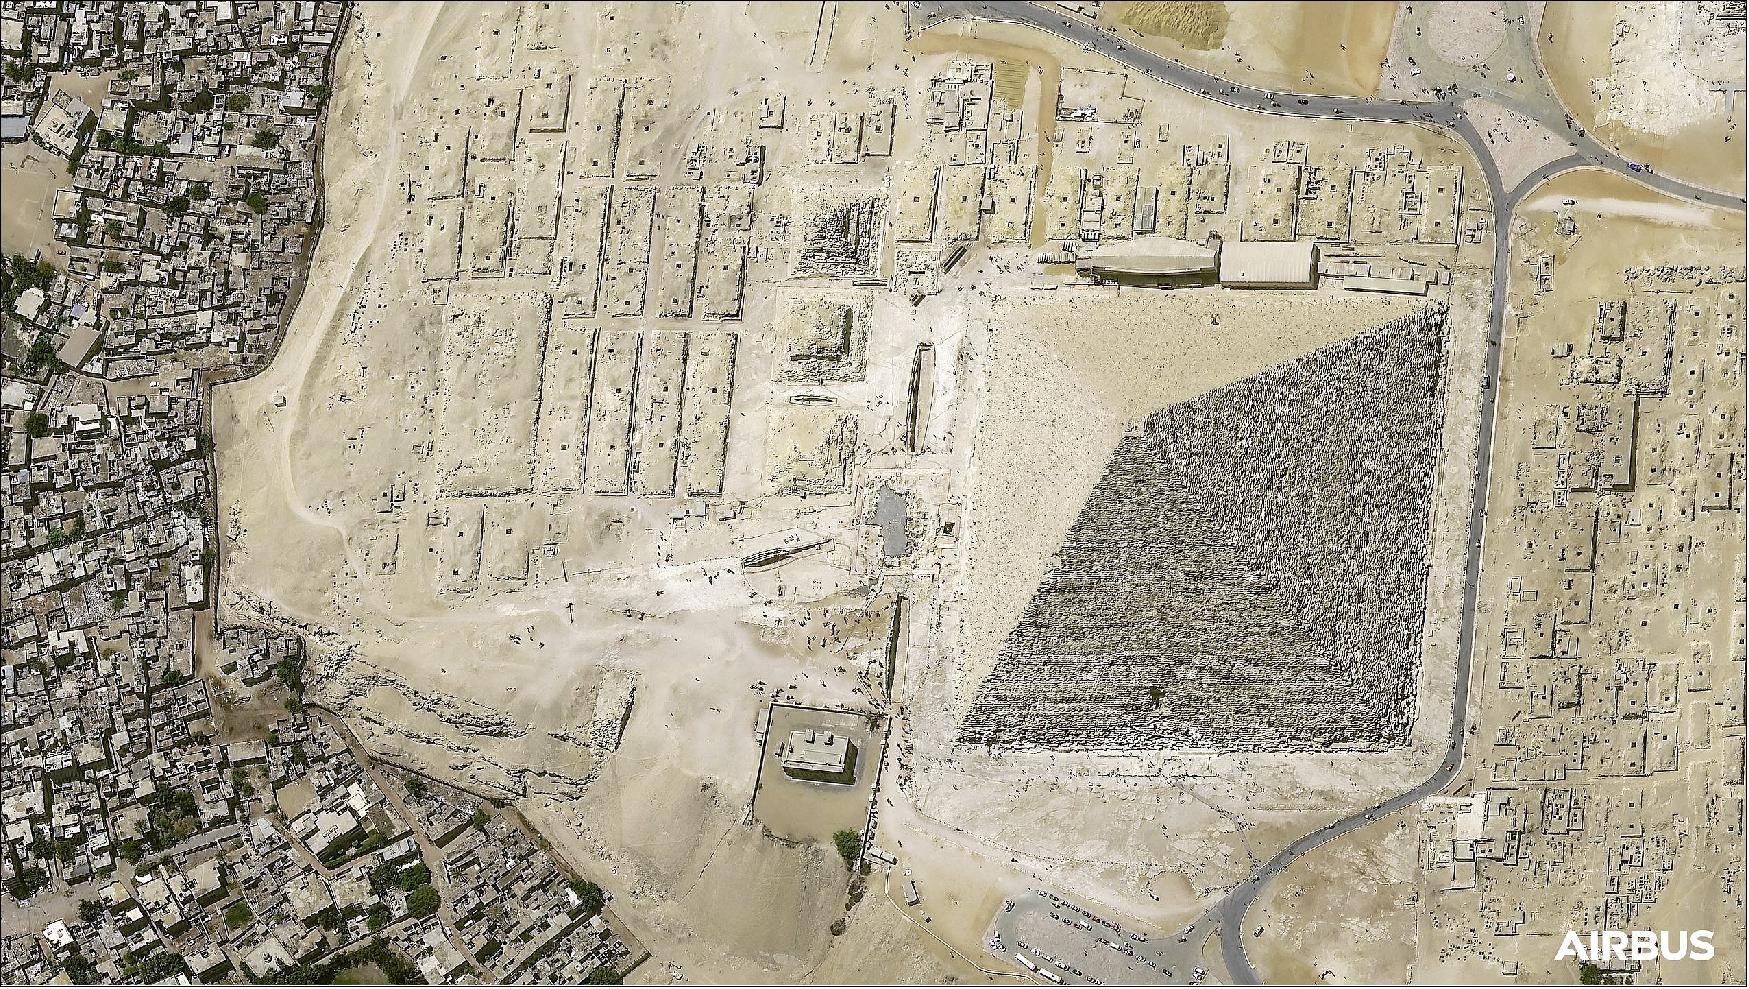 Figure 13: Pleiades Neo 3 satellite first image of the Cheops Pyramid, Cairo, Egypt - at 30 cm native resolution (image credit: Airbus)